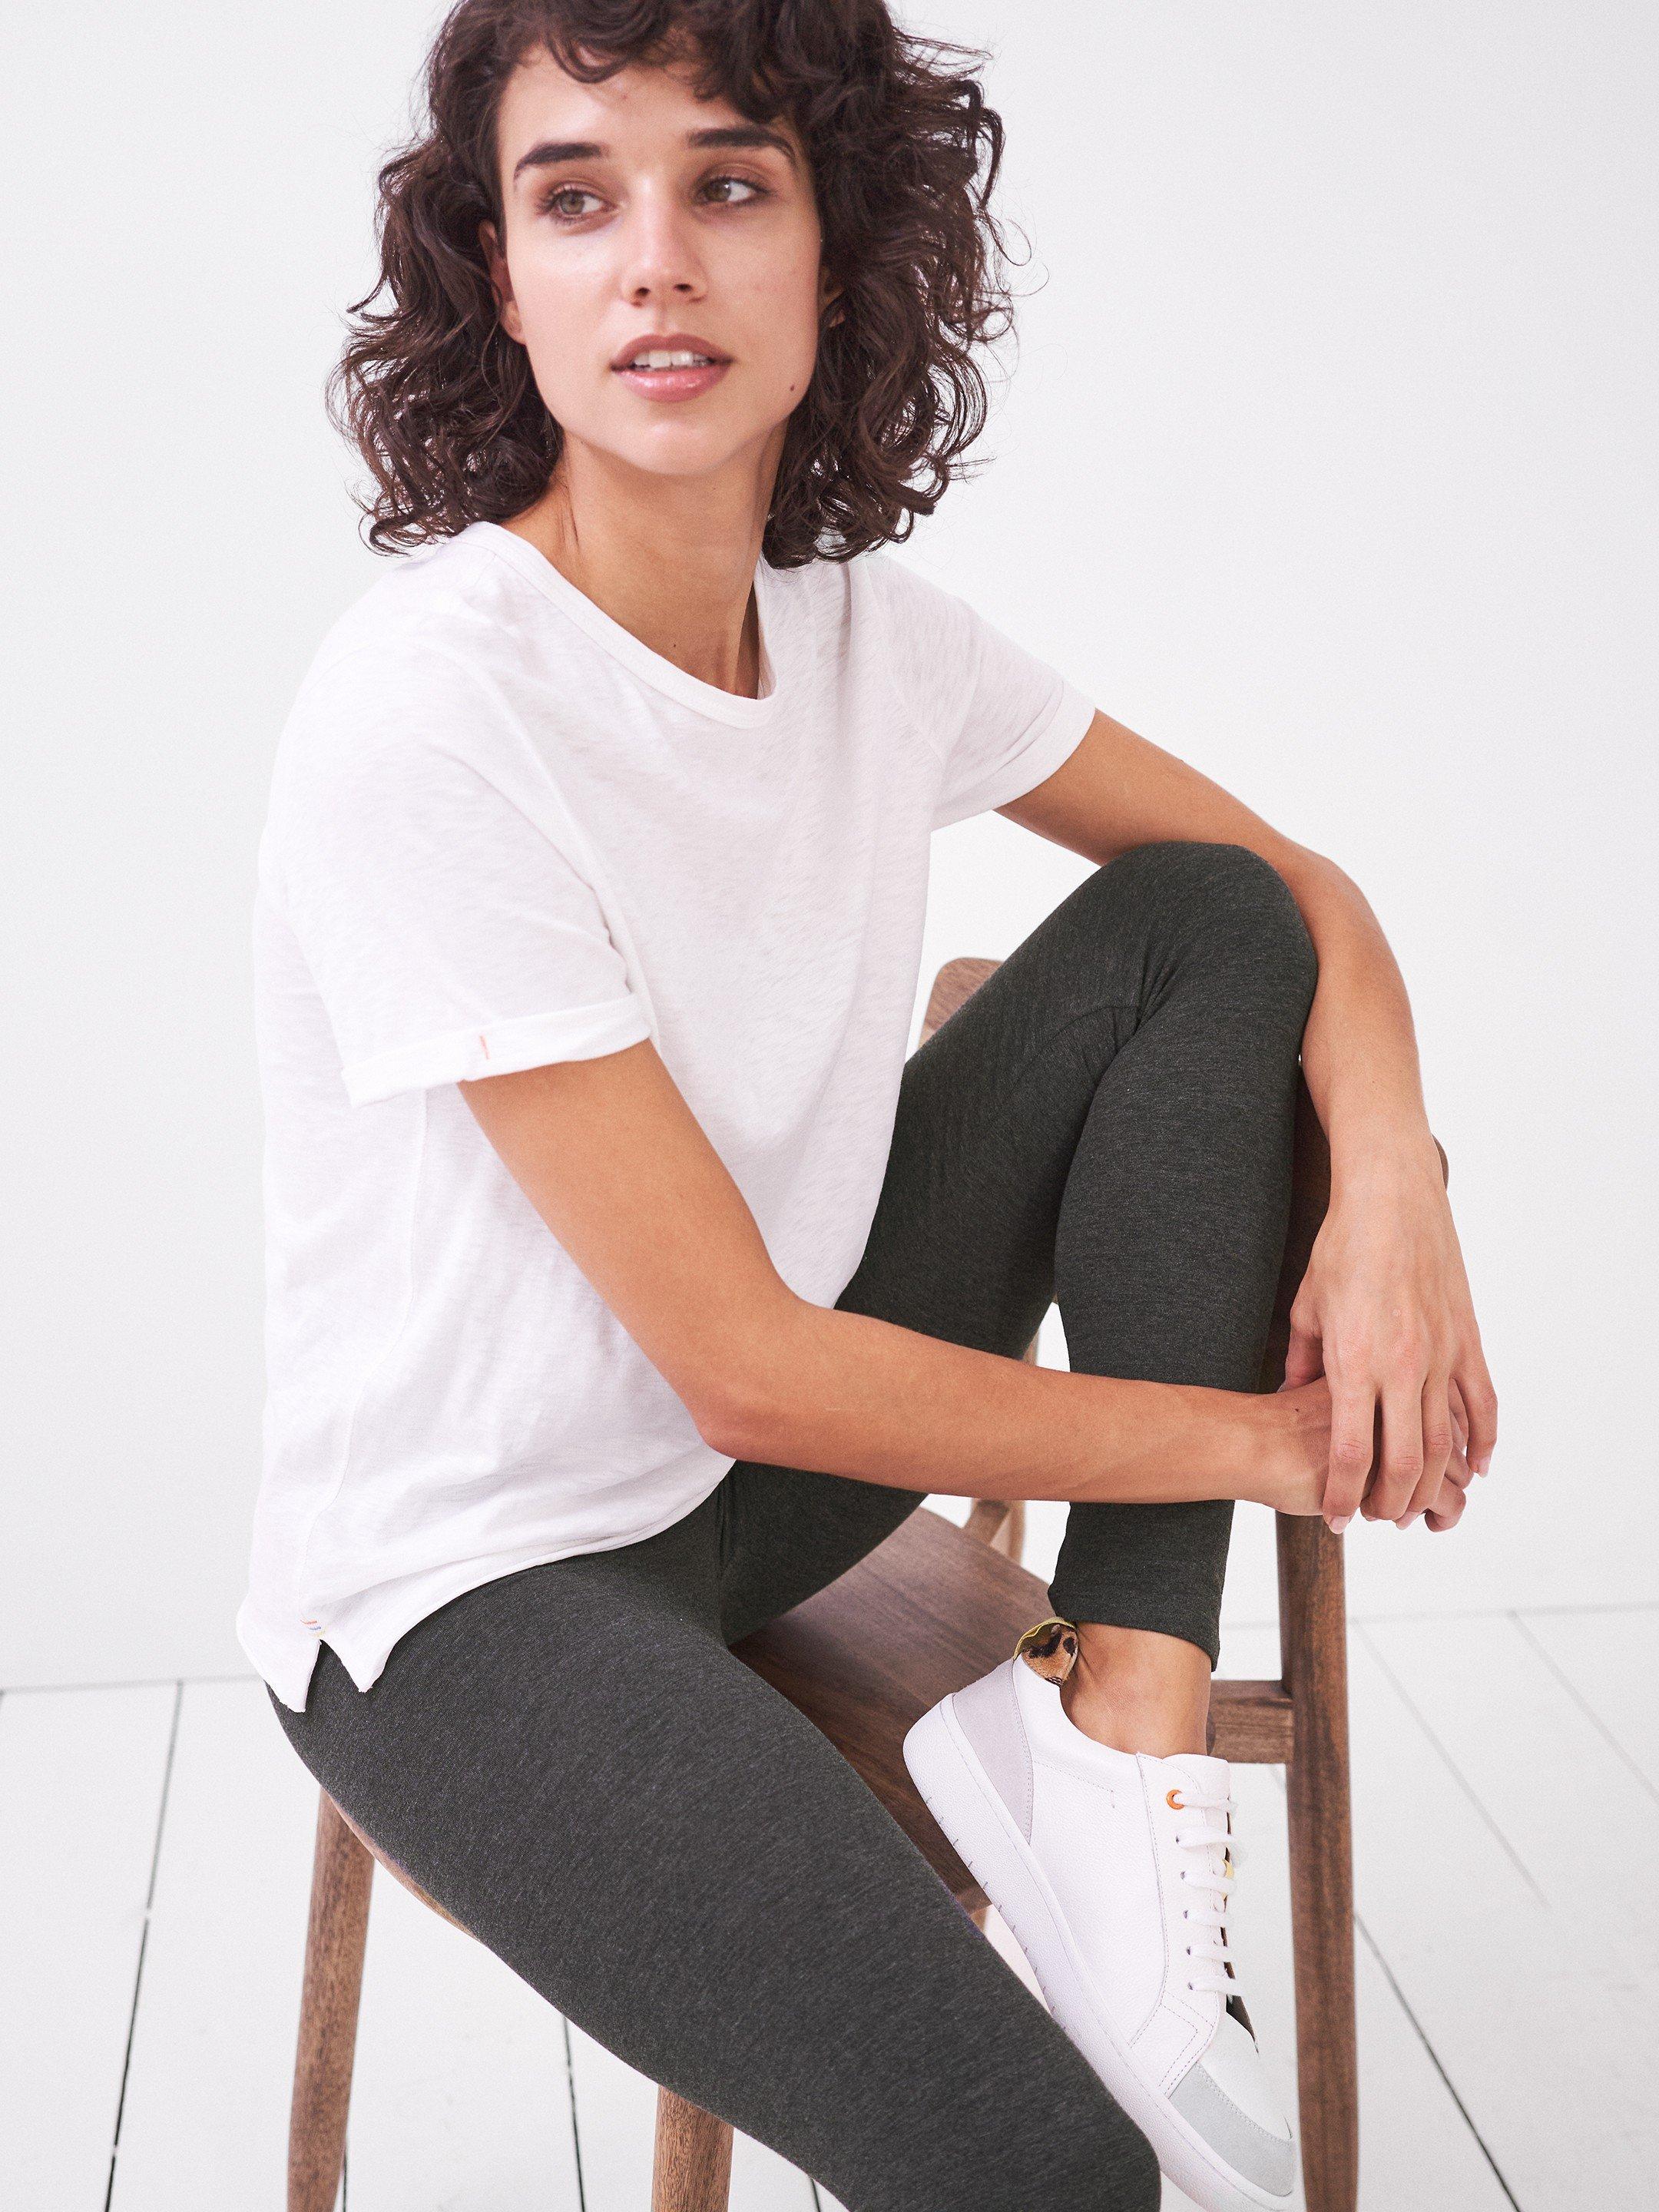 Gray Marble Recycled Leggings with Pockets – C'est Lä Vé